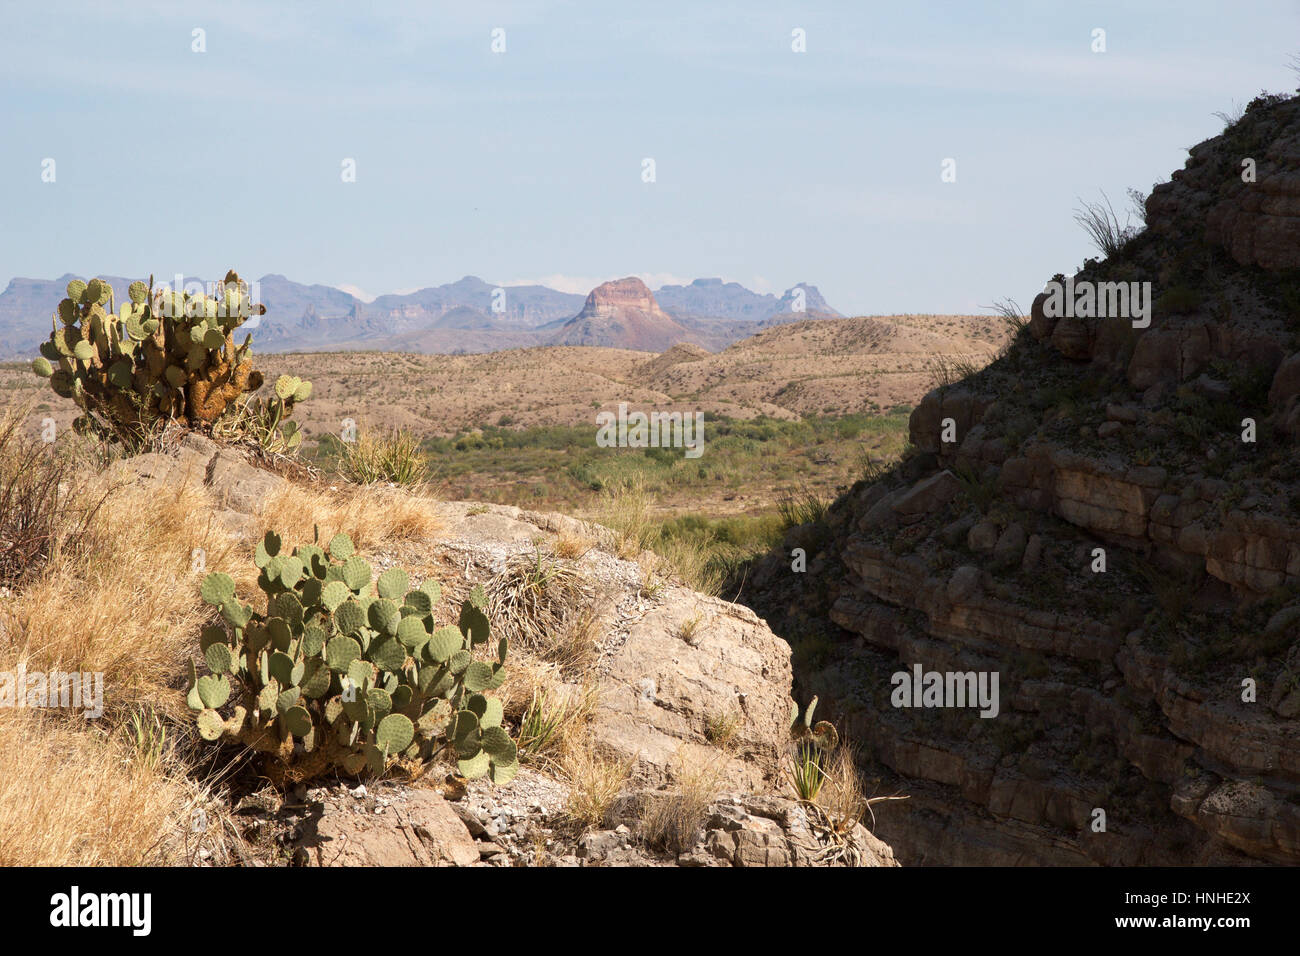 View from Santa Elena Canyon towards Kit Peak and the Chihuahan desert in Big Bend National Park, Texas Stock Photo